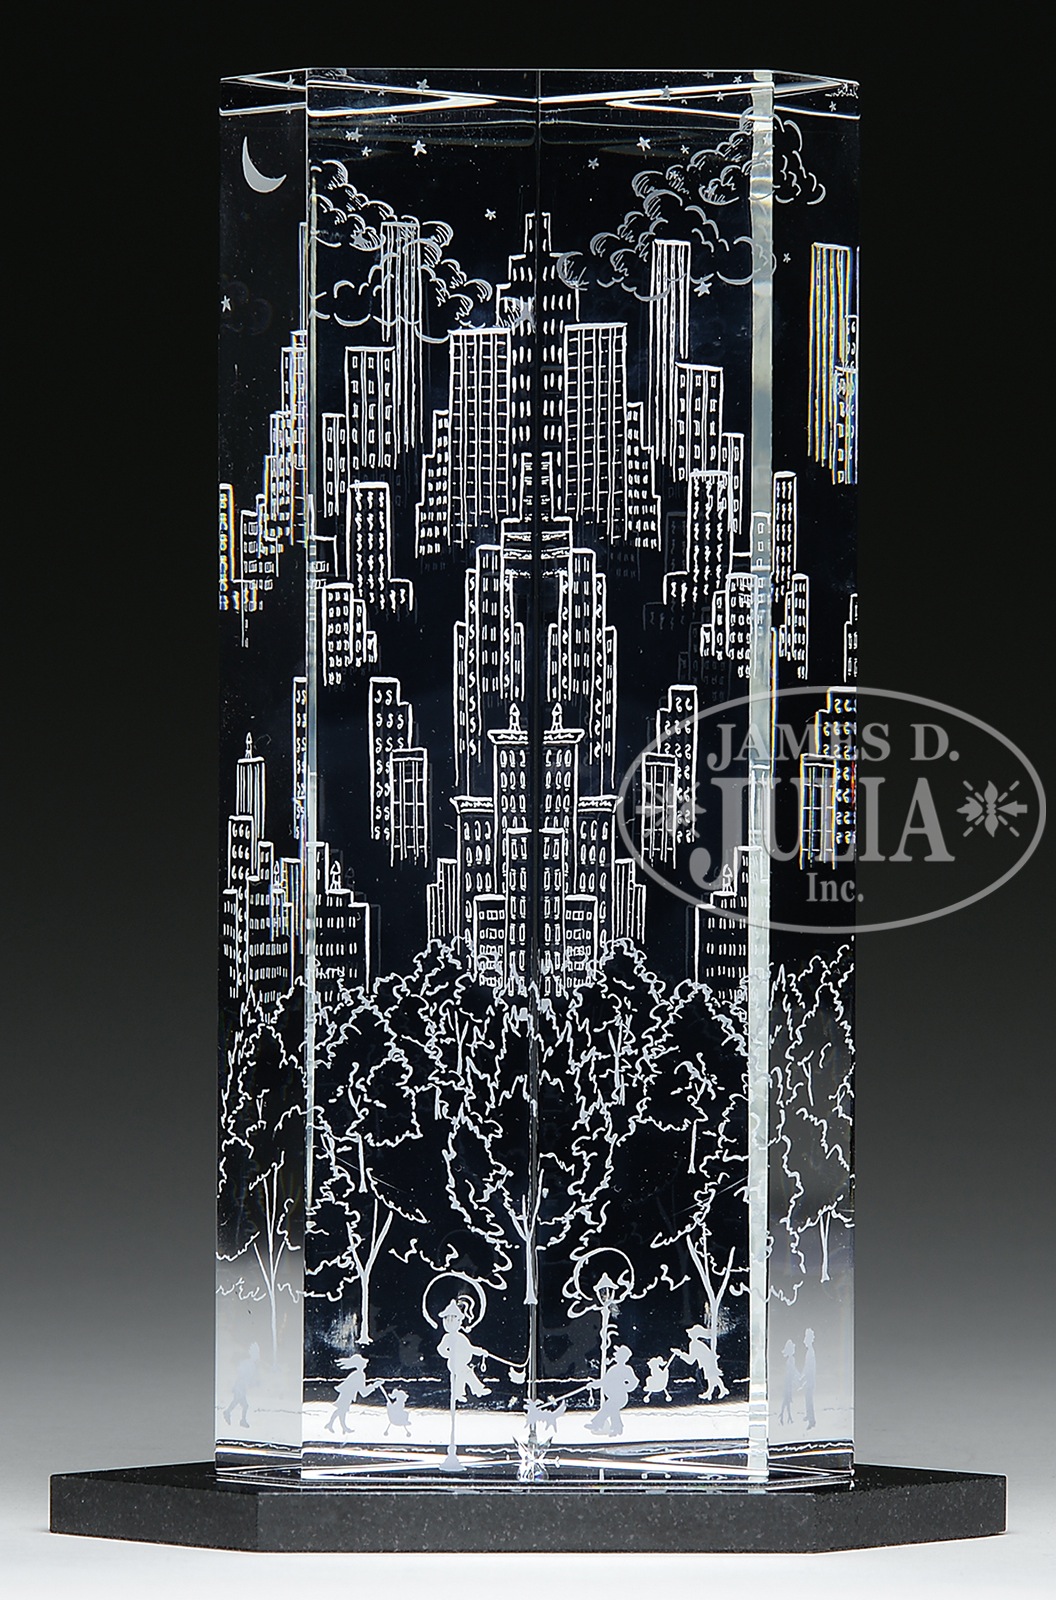 STEUBEN SPIRE DEPICTING NEW YORK. The spire in triangular form with cut corners. An etched scene